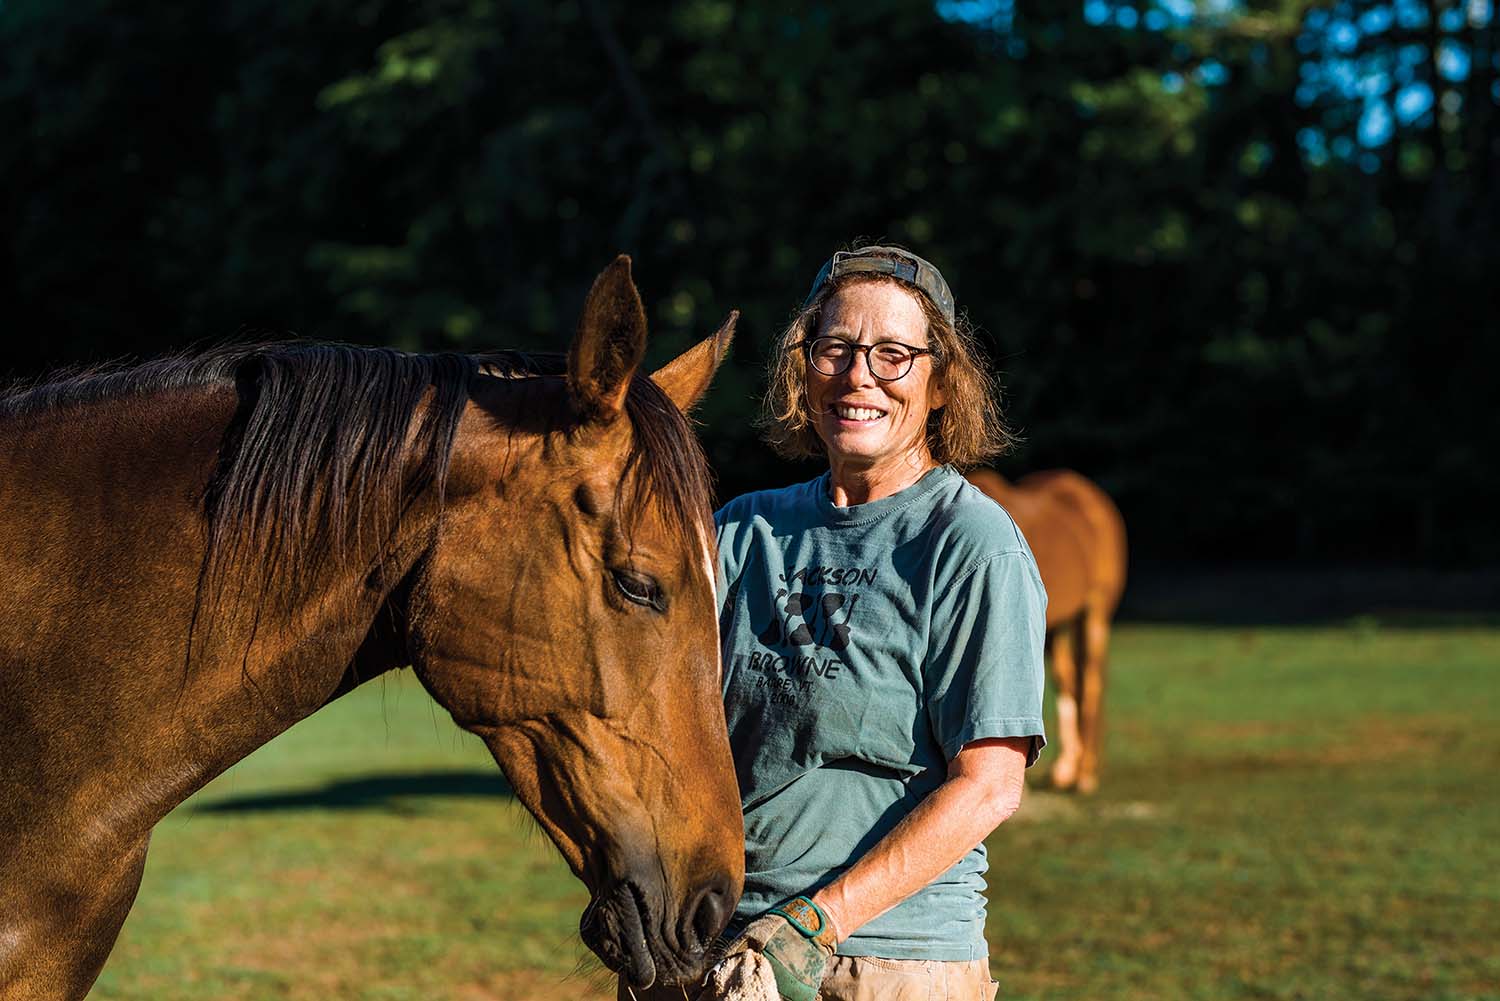 “I Hadn’t Been Near a Horse in 30 Years”